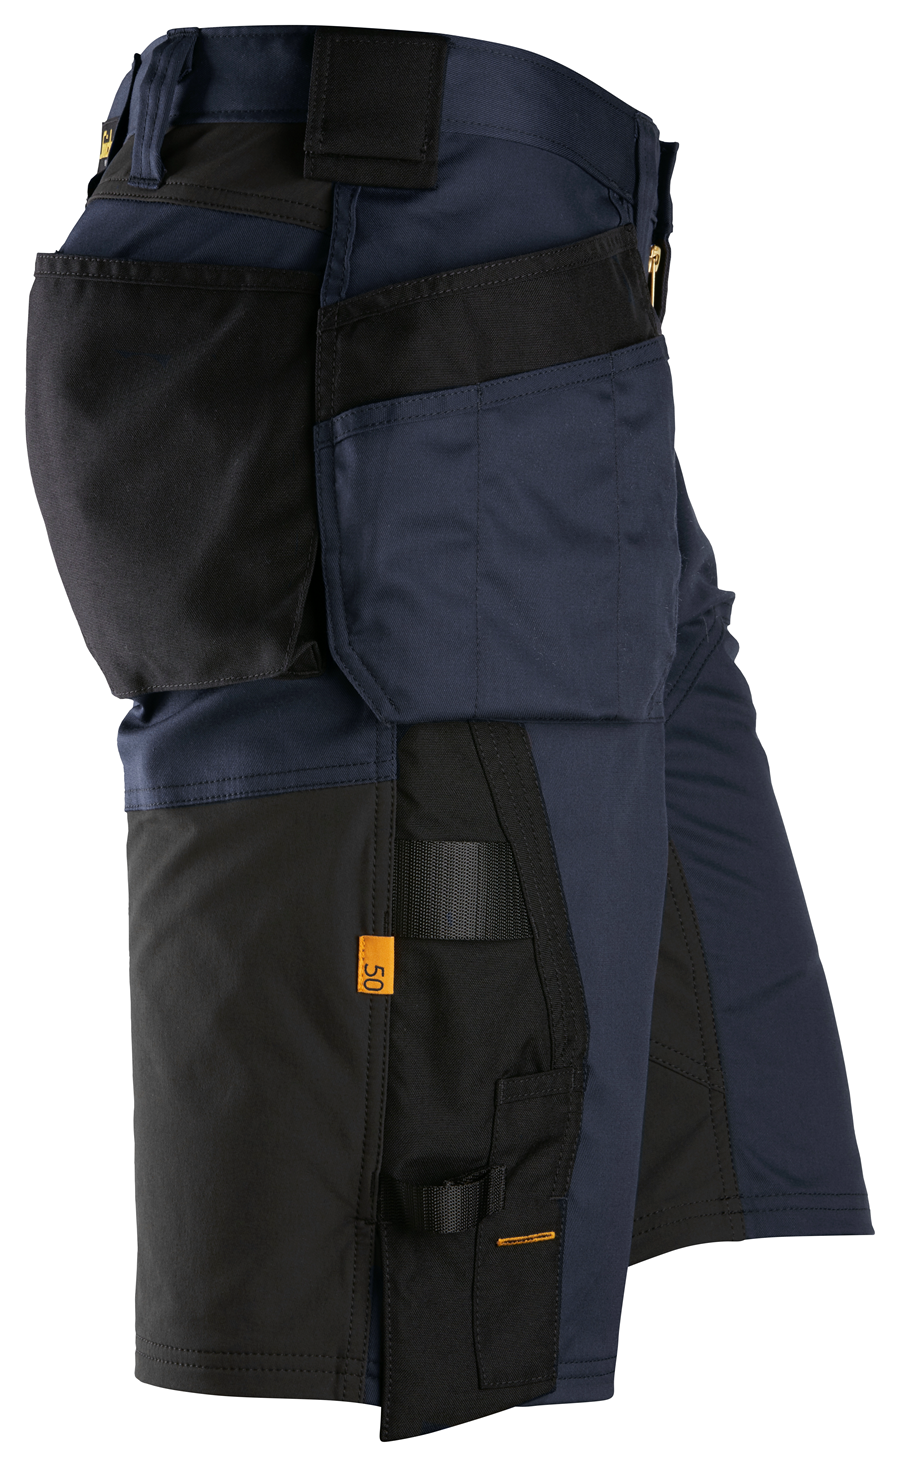 Centre PPE | Work | to Z Loose AllroundWork, Snickers A Fit 6151 - Pockets Shorts Safety Uniforms Holster Stretch